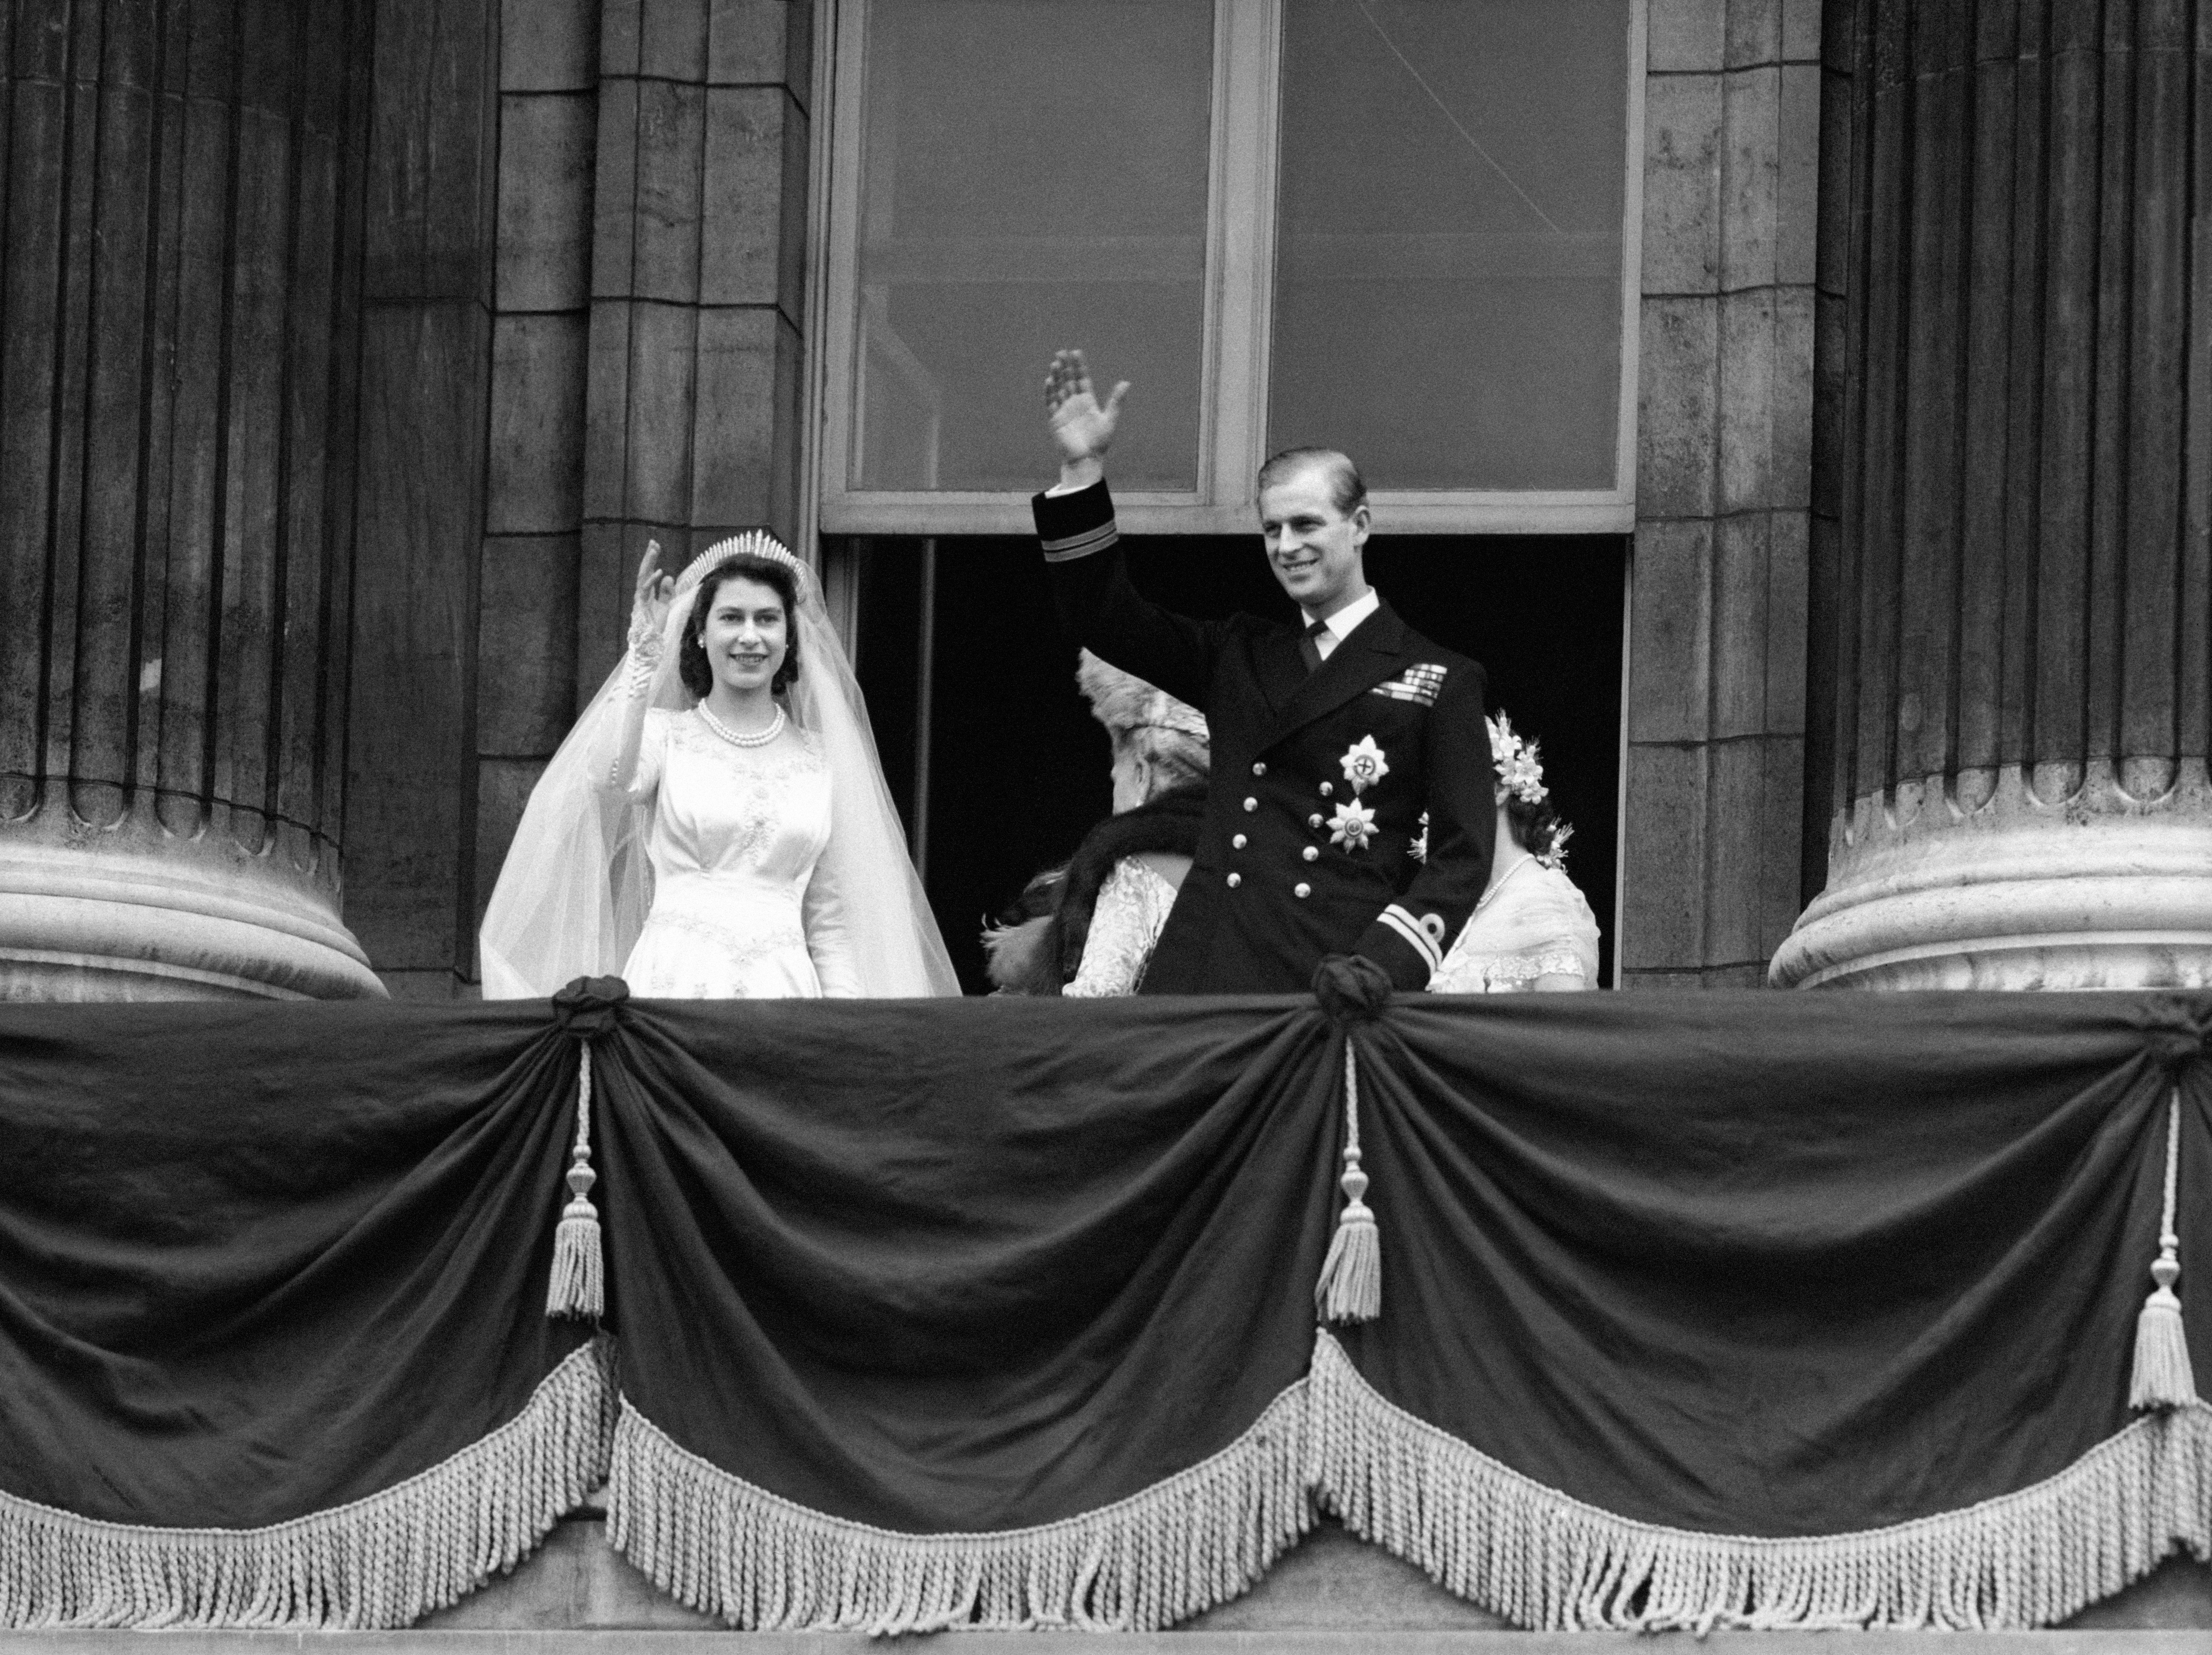 The Royal couple wave to crowds from balcony of Buckingham Palace